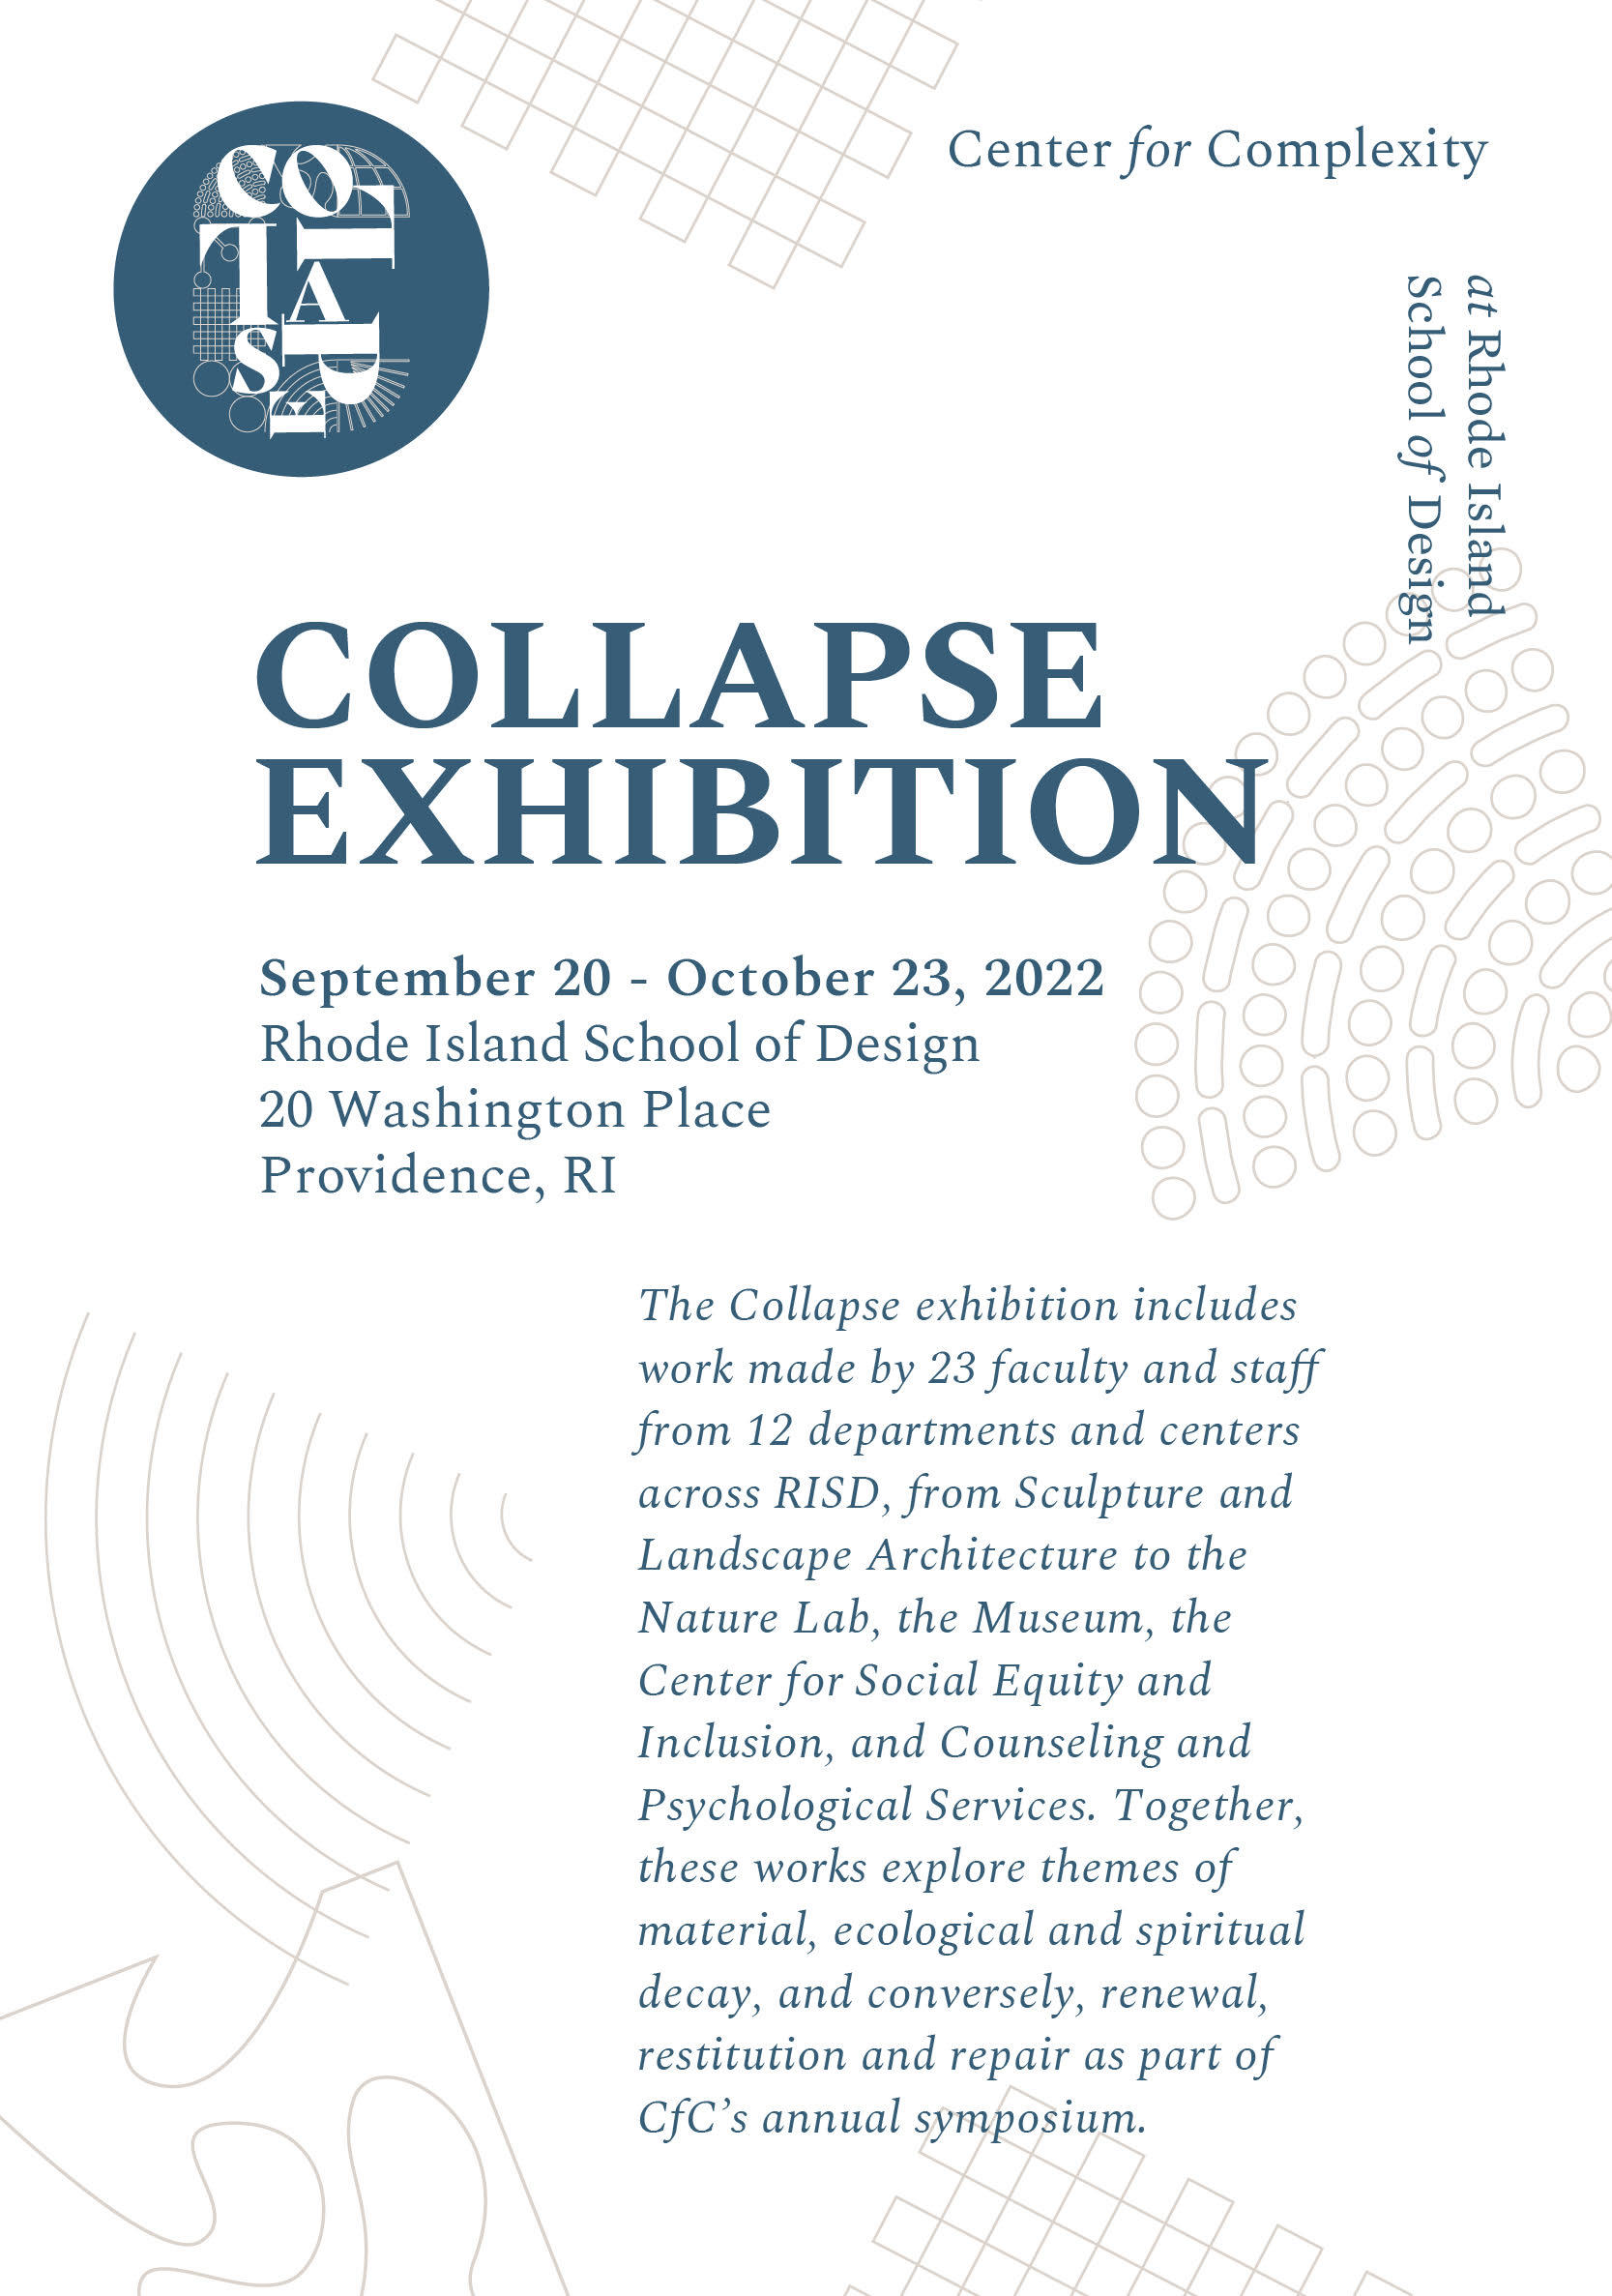 Poster titled Collapse Exhibition